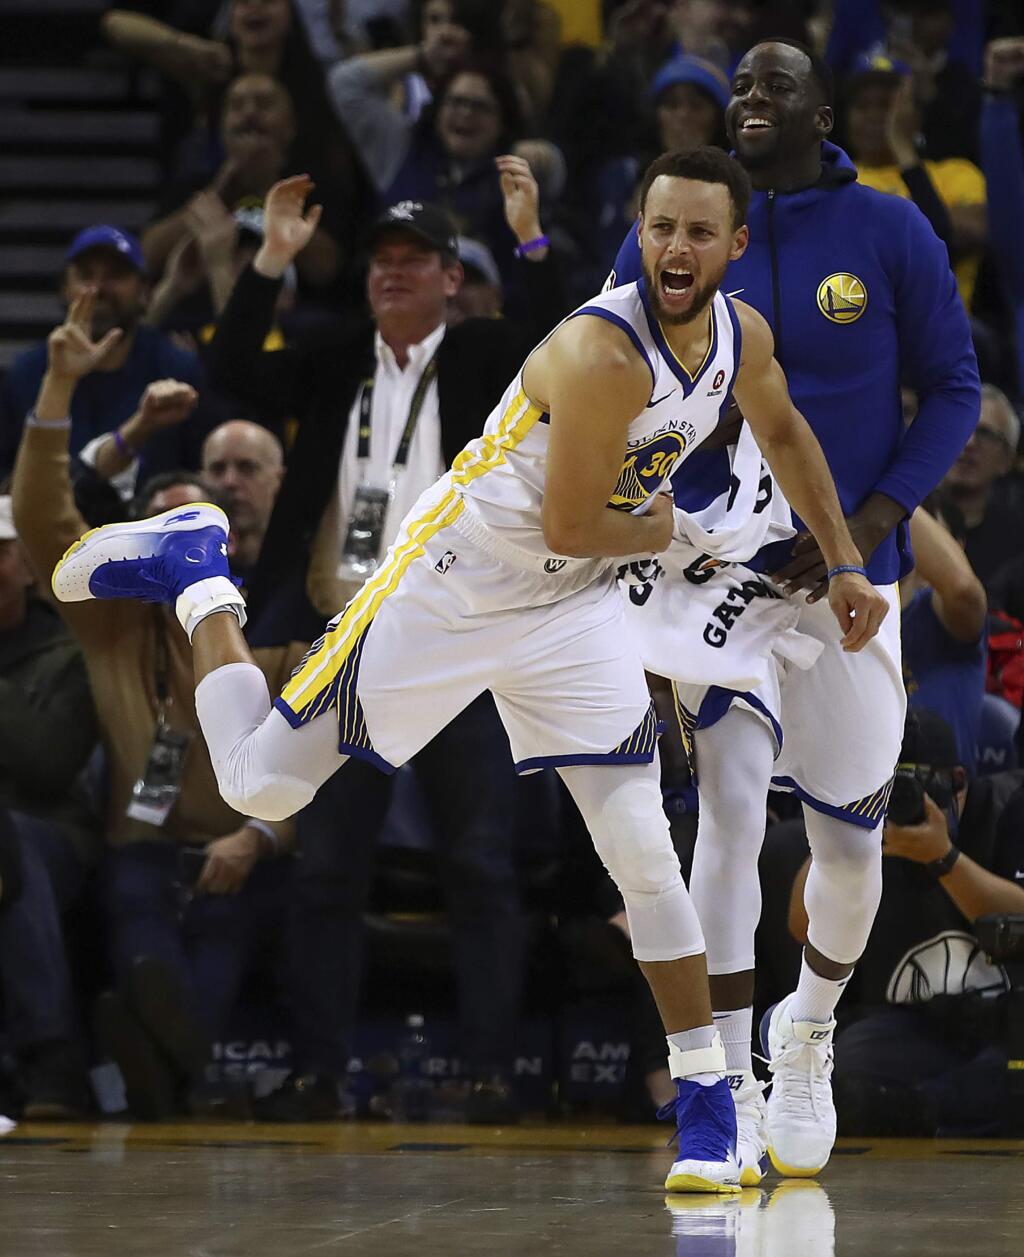 Golden State Warriors' Stephen Curry (30) and Draymond Green celebrate a score against the Denver Nuggets during the second half of an NBA basketball game Monday, Jan. 8, 2018, in Oakland, Calif. (AP Photo/Ben Margot)